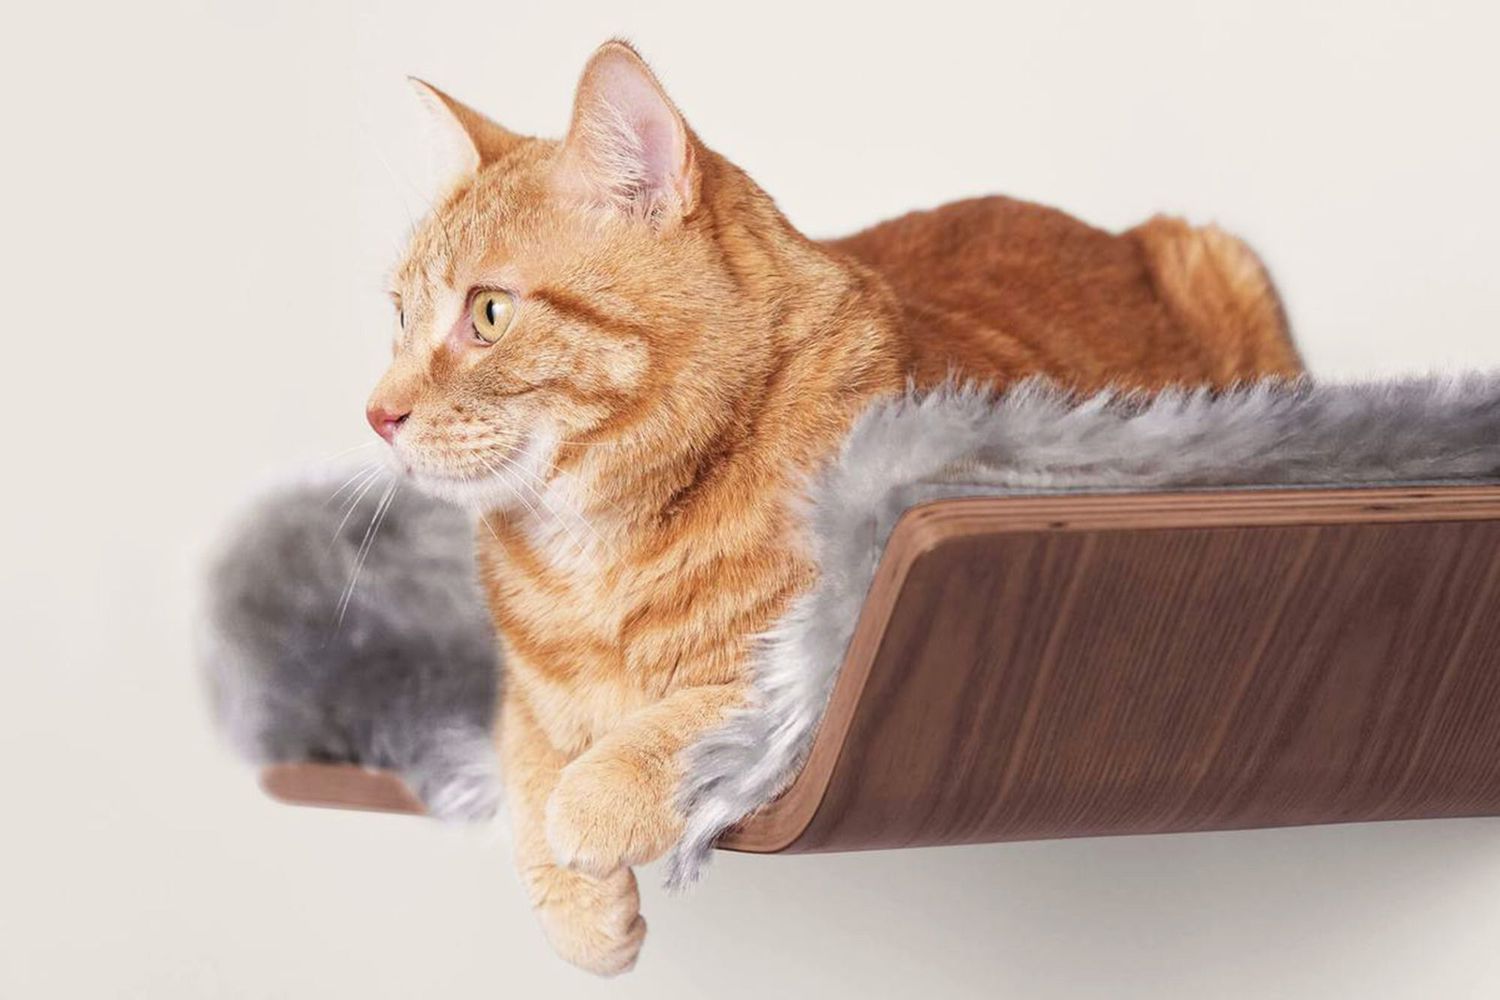 Beige Premium Set RUN HELIX Cat Window Perch with Plush mat Cat Hammock for Indoor Large Cats Cat Beds with 4 Sturdy Suction Cups cat Shelves Providing All-Around 360° Sunbathe Hold 30lb-50lb 